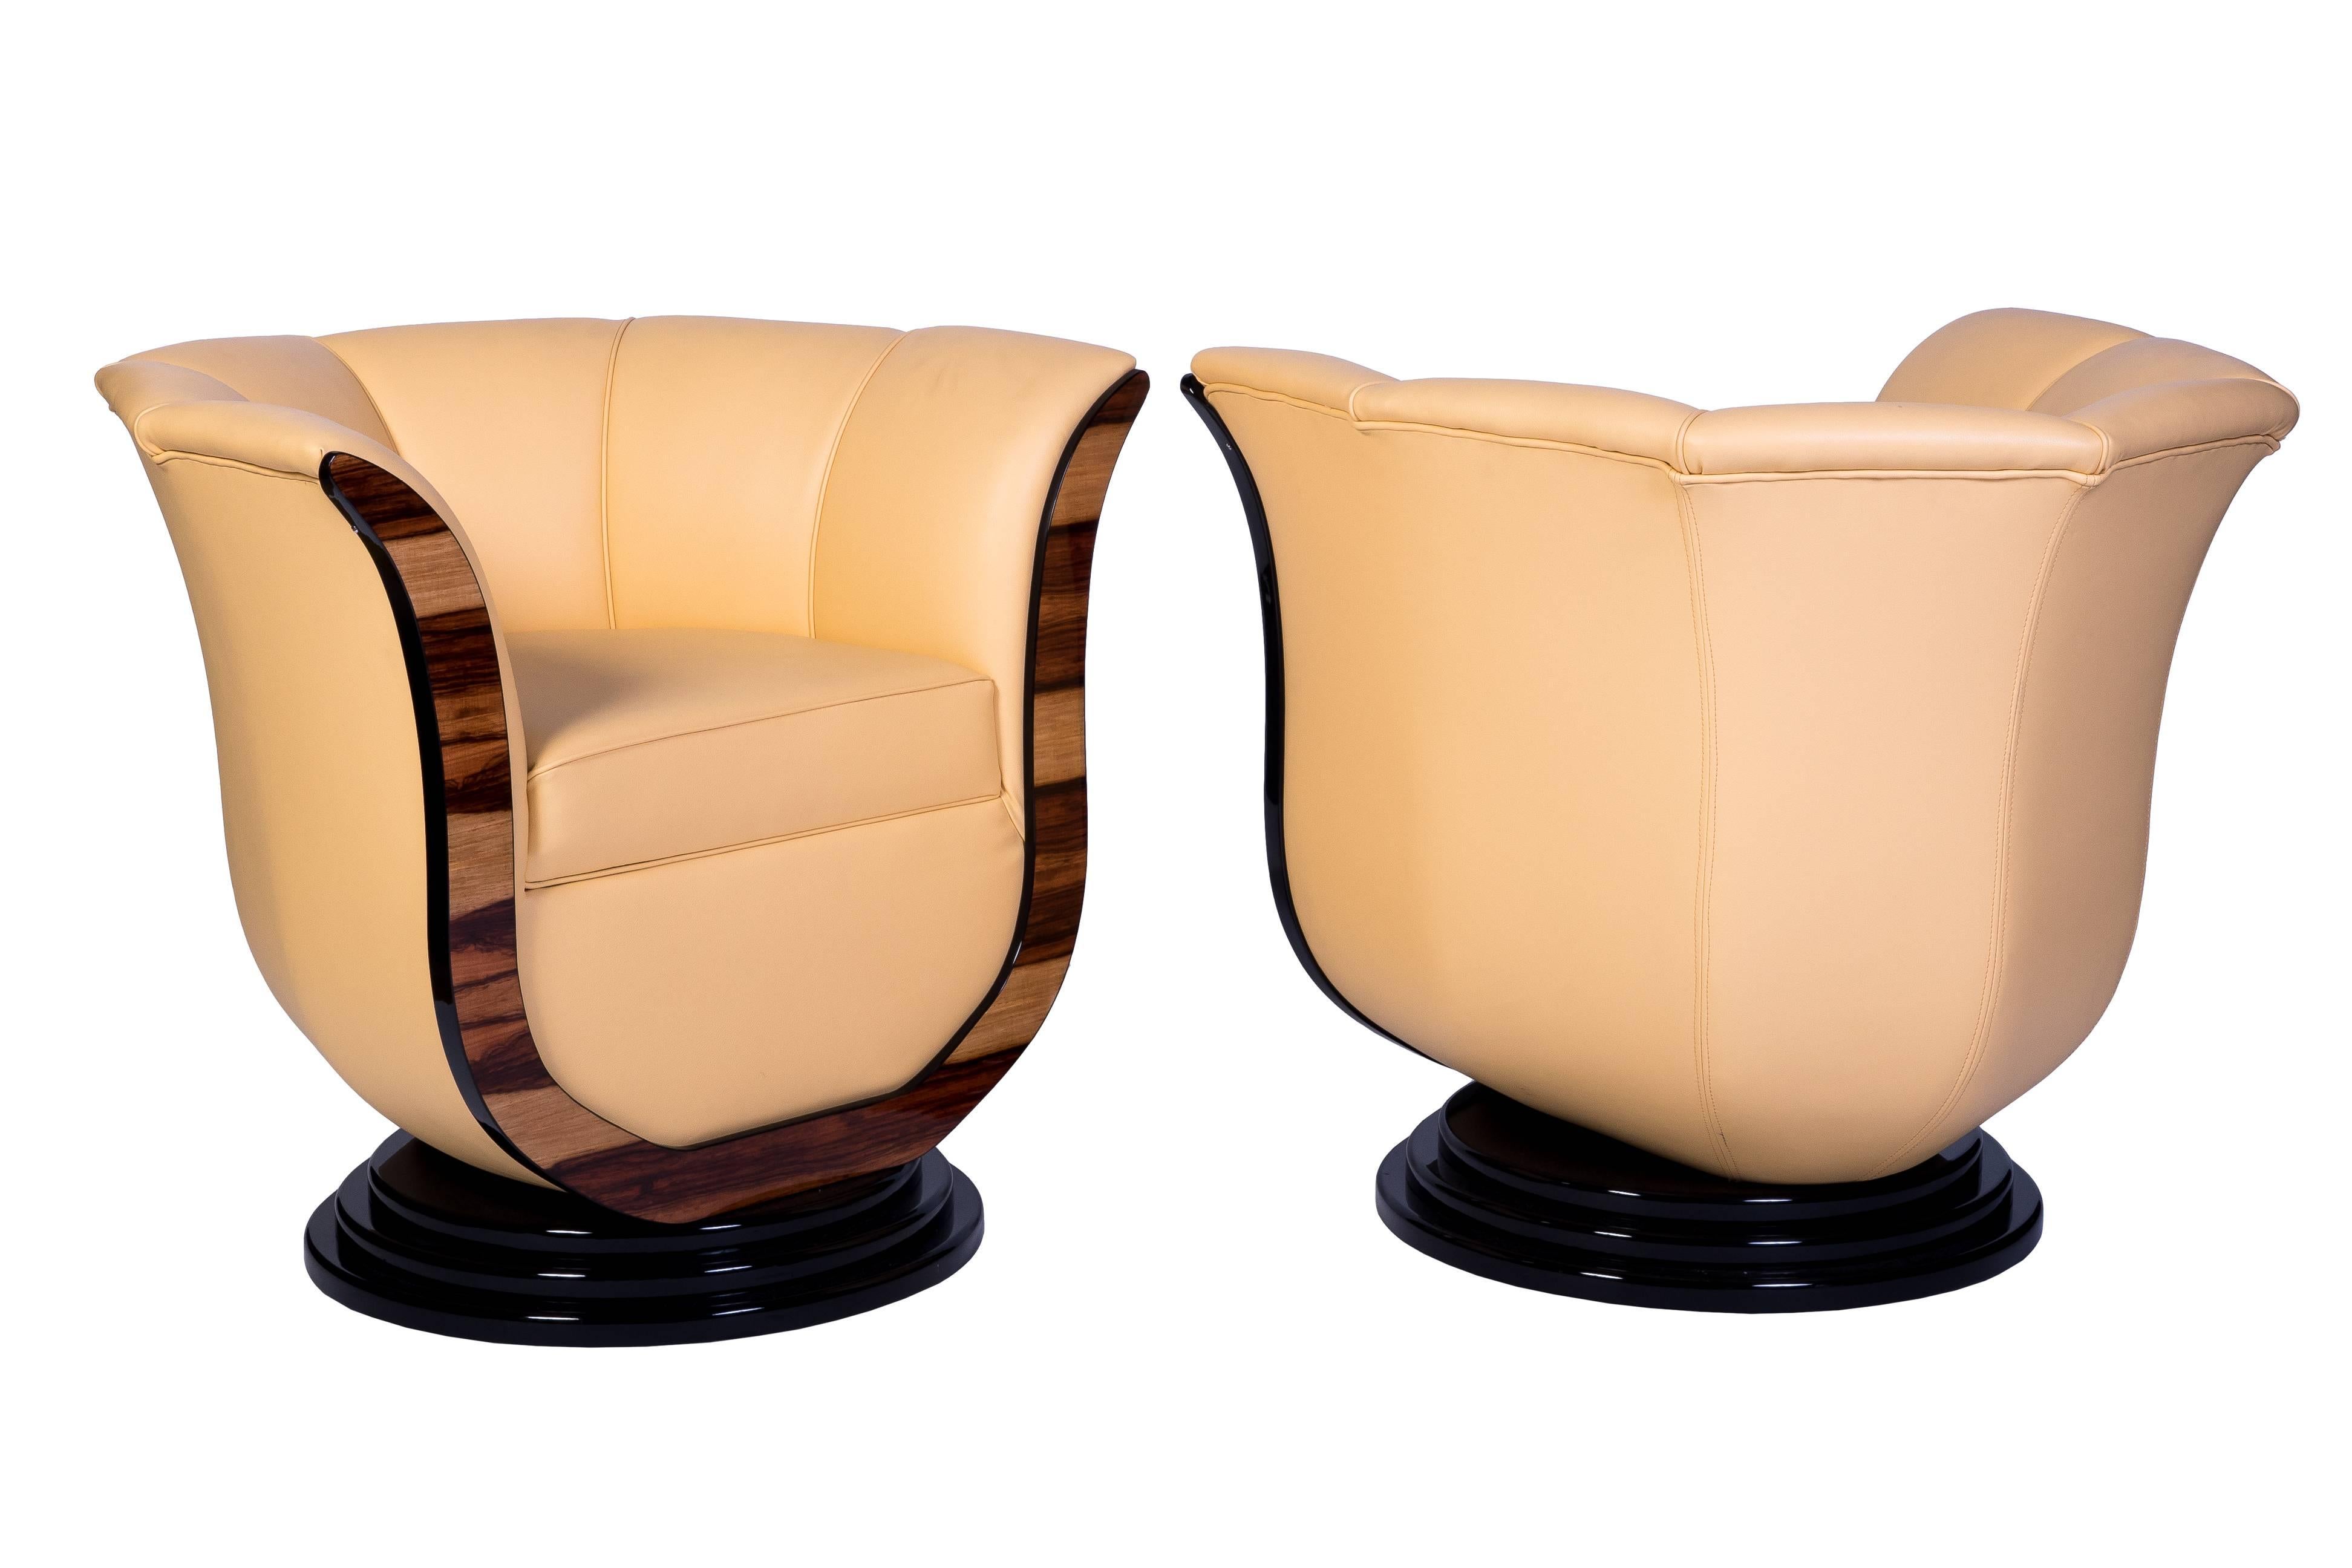 This superb pair of Art Deco style tulip armchairs feature a tulip form design in a luscious cream leather upholstery, and a high gloss lacquer finish and stair foot base in black.